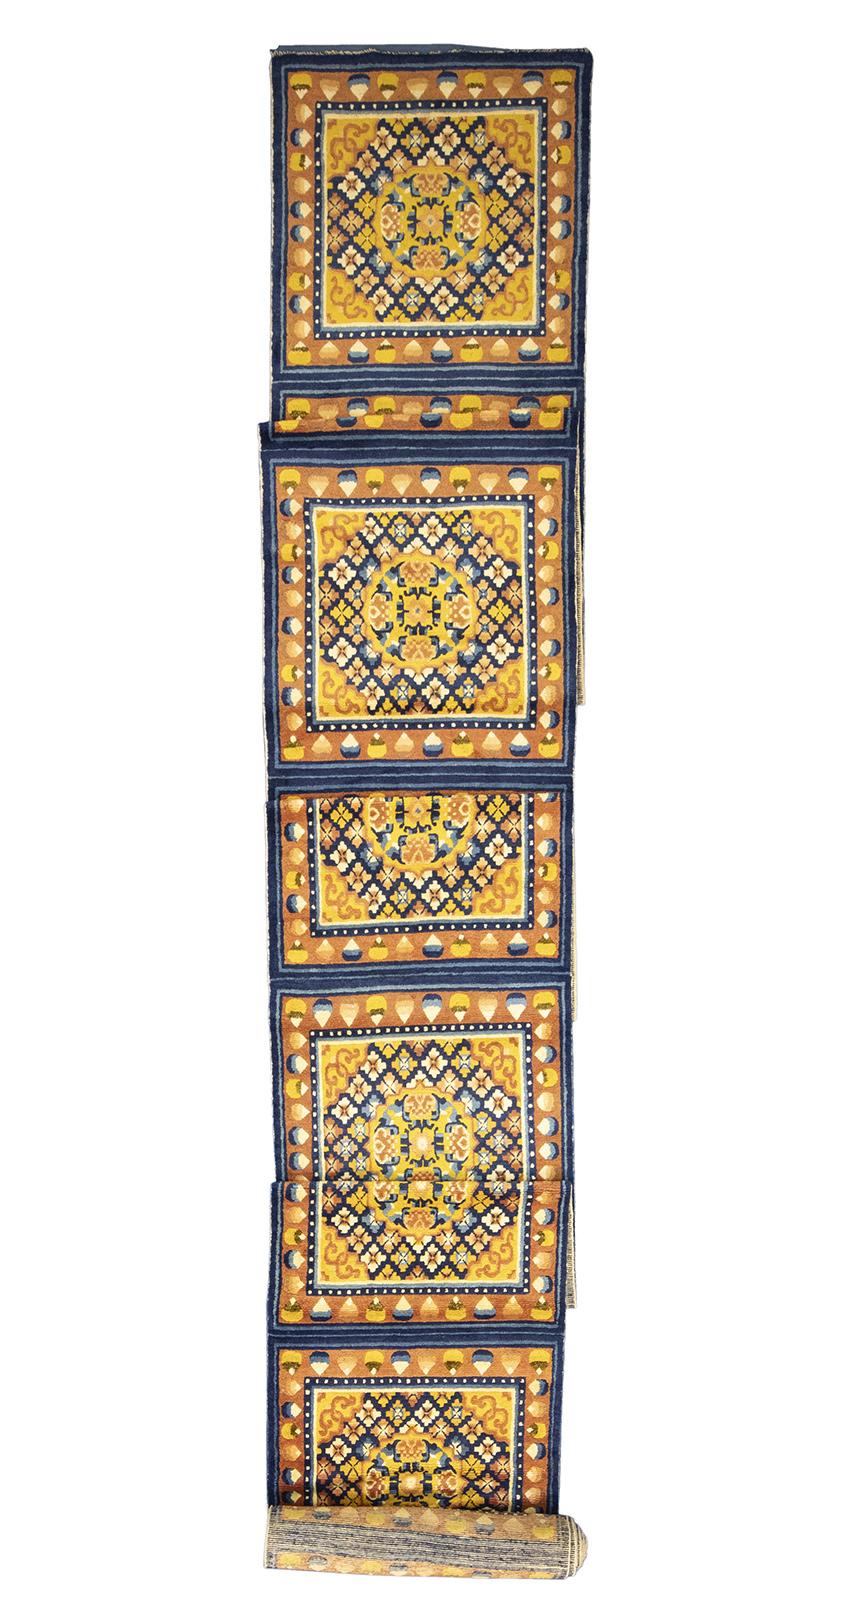 This is a truly remarkable Tibetan Rug Antique Buddhist temple with a special and unique design that embodies the rich spiritual heritage and cultural significance of Buddhism. This extraordinary piece stands out for its amazing craftsmanship,